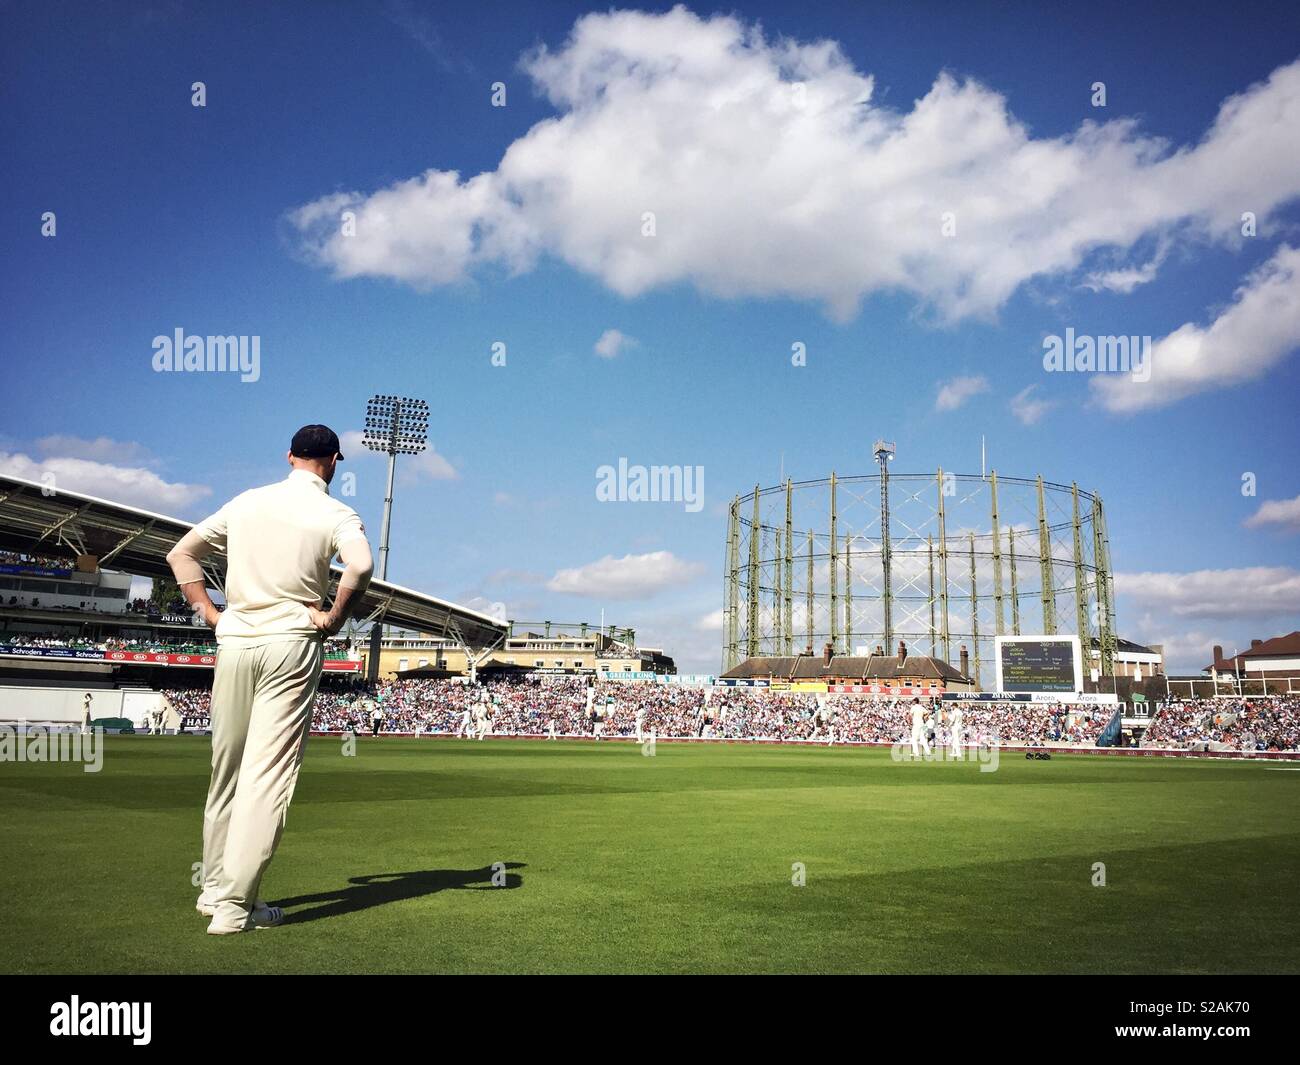 A cricketer stands near the boundary rope during a cricket match at the Kia Oval in London. Stock Photo